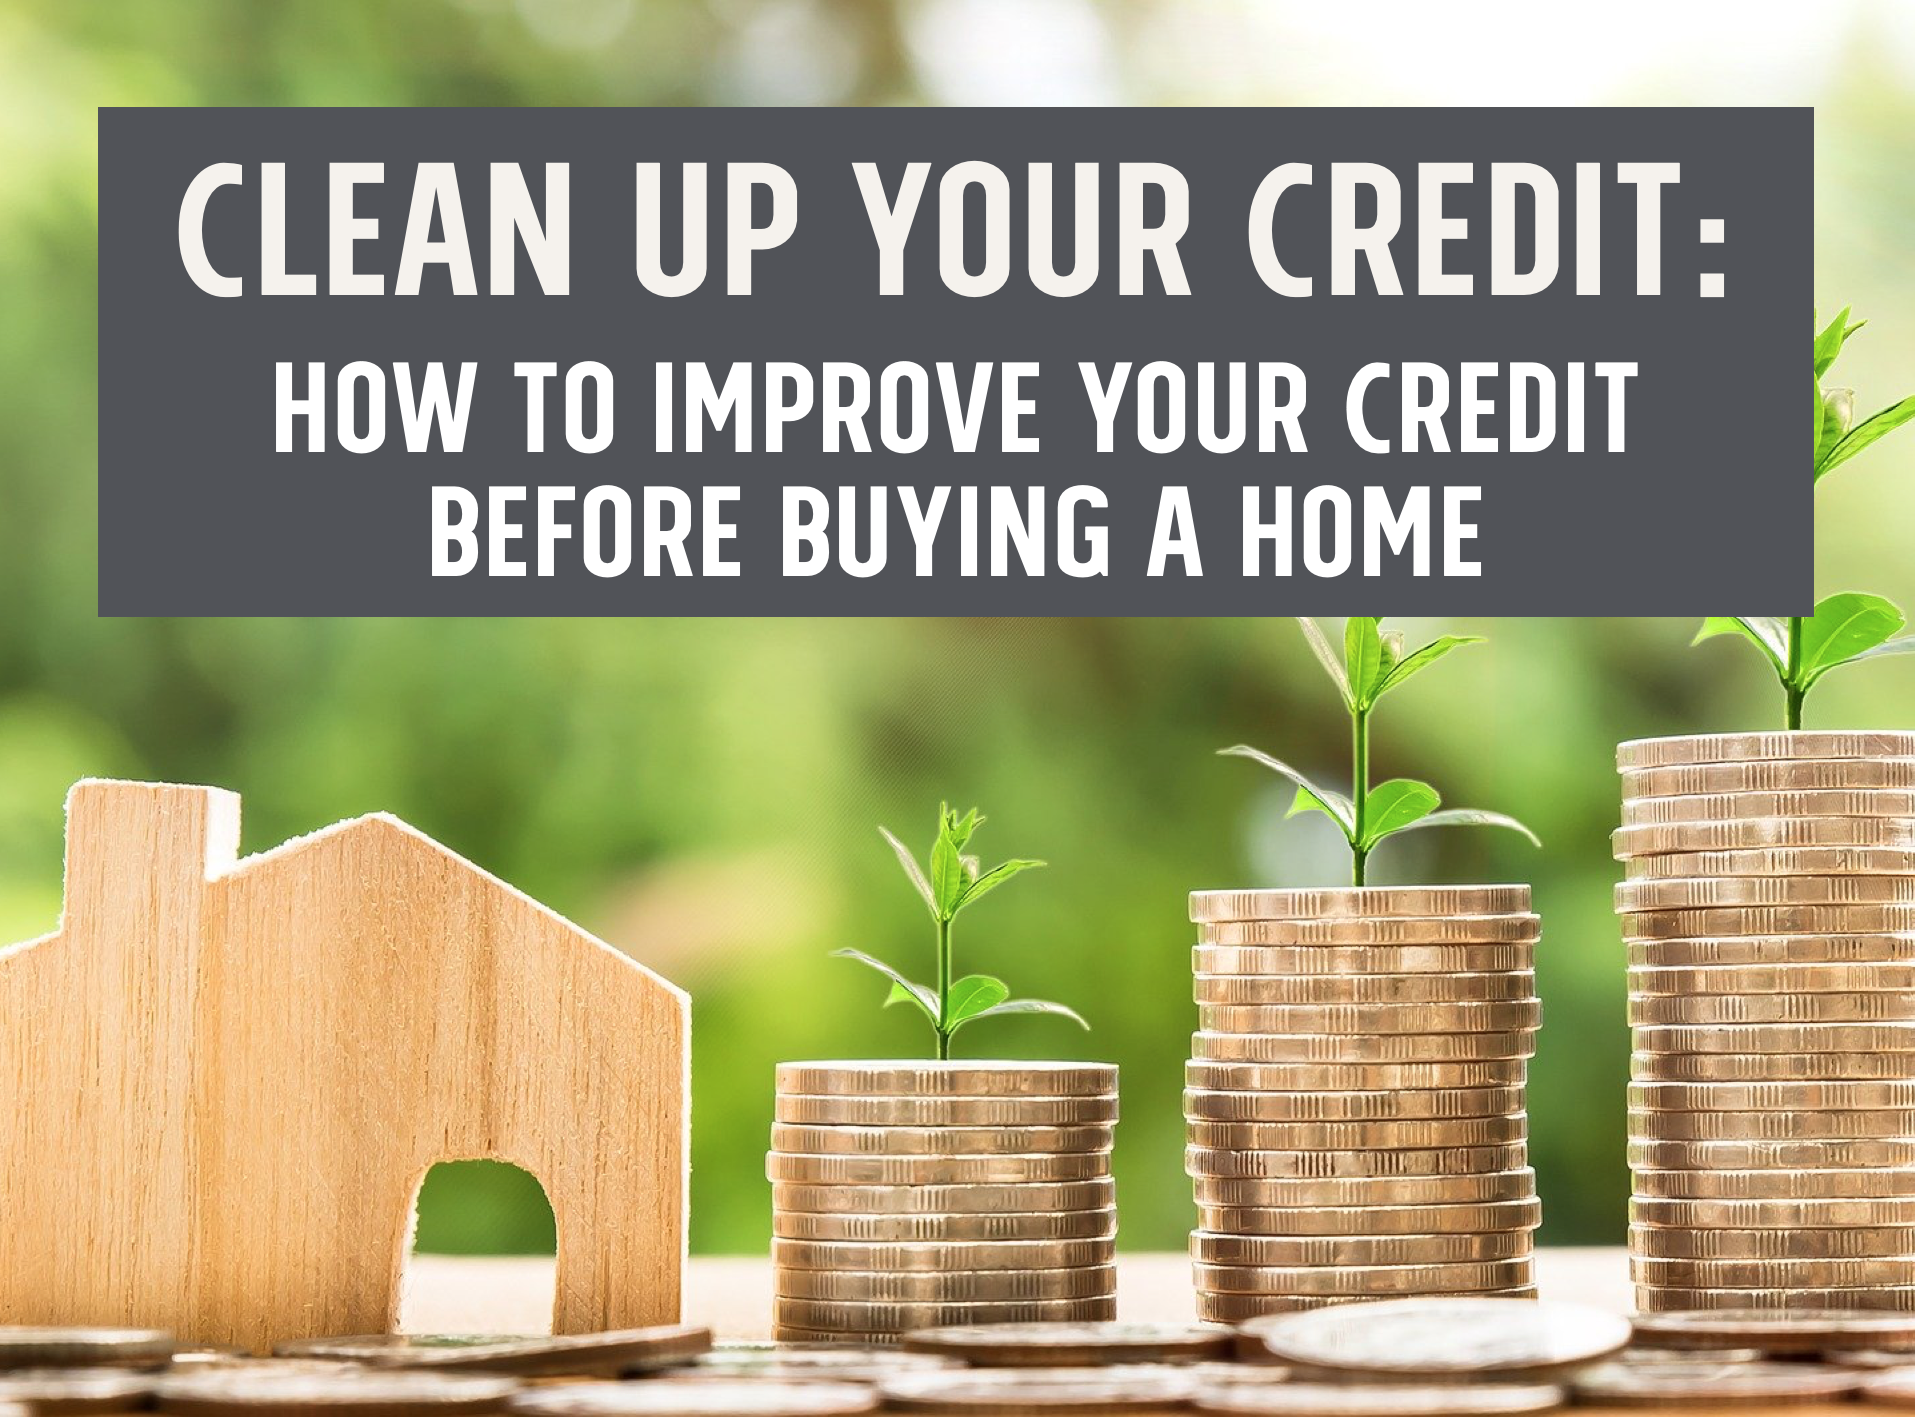 How to improve your credit before buying a home